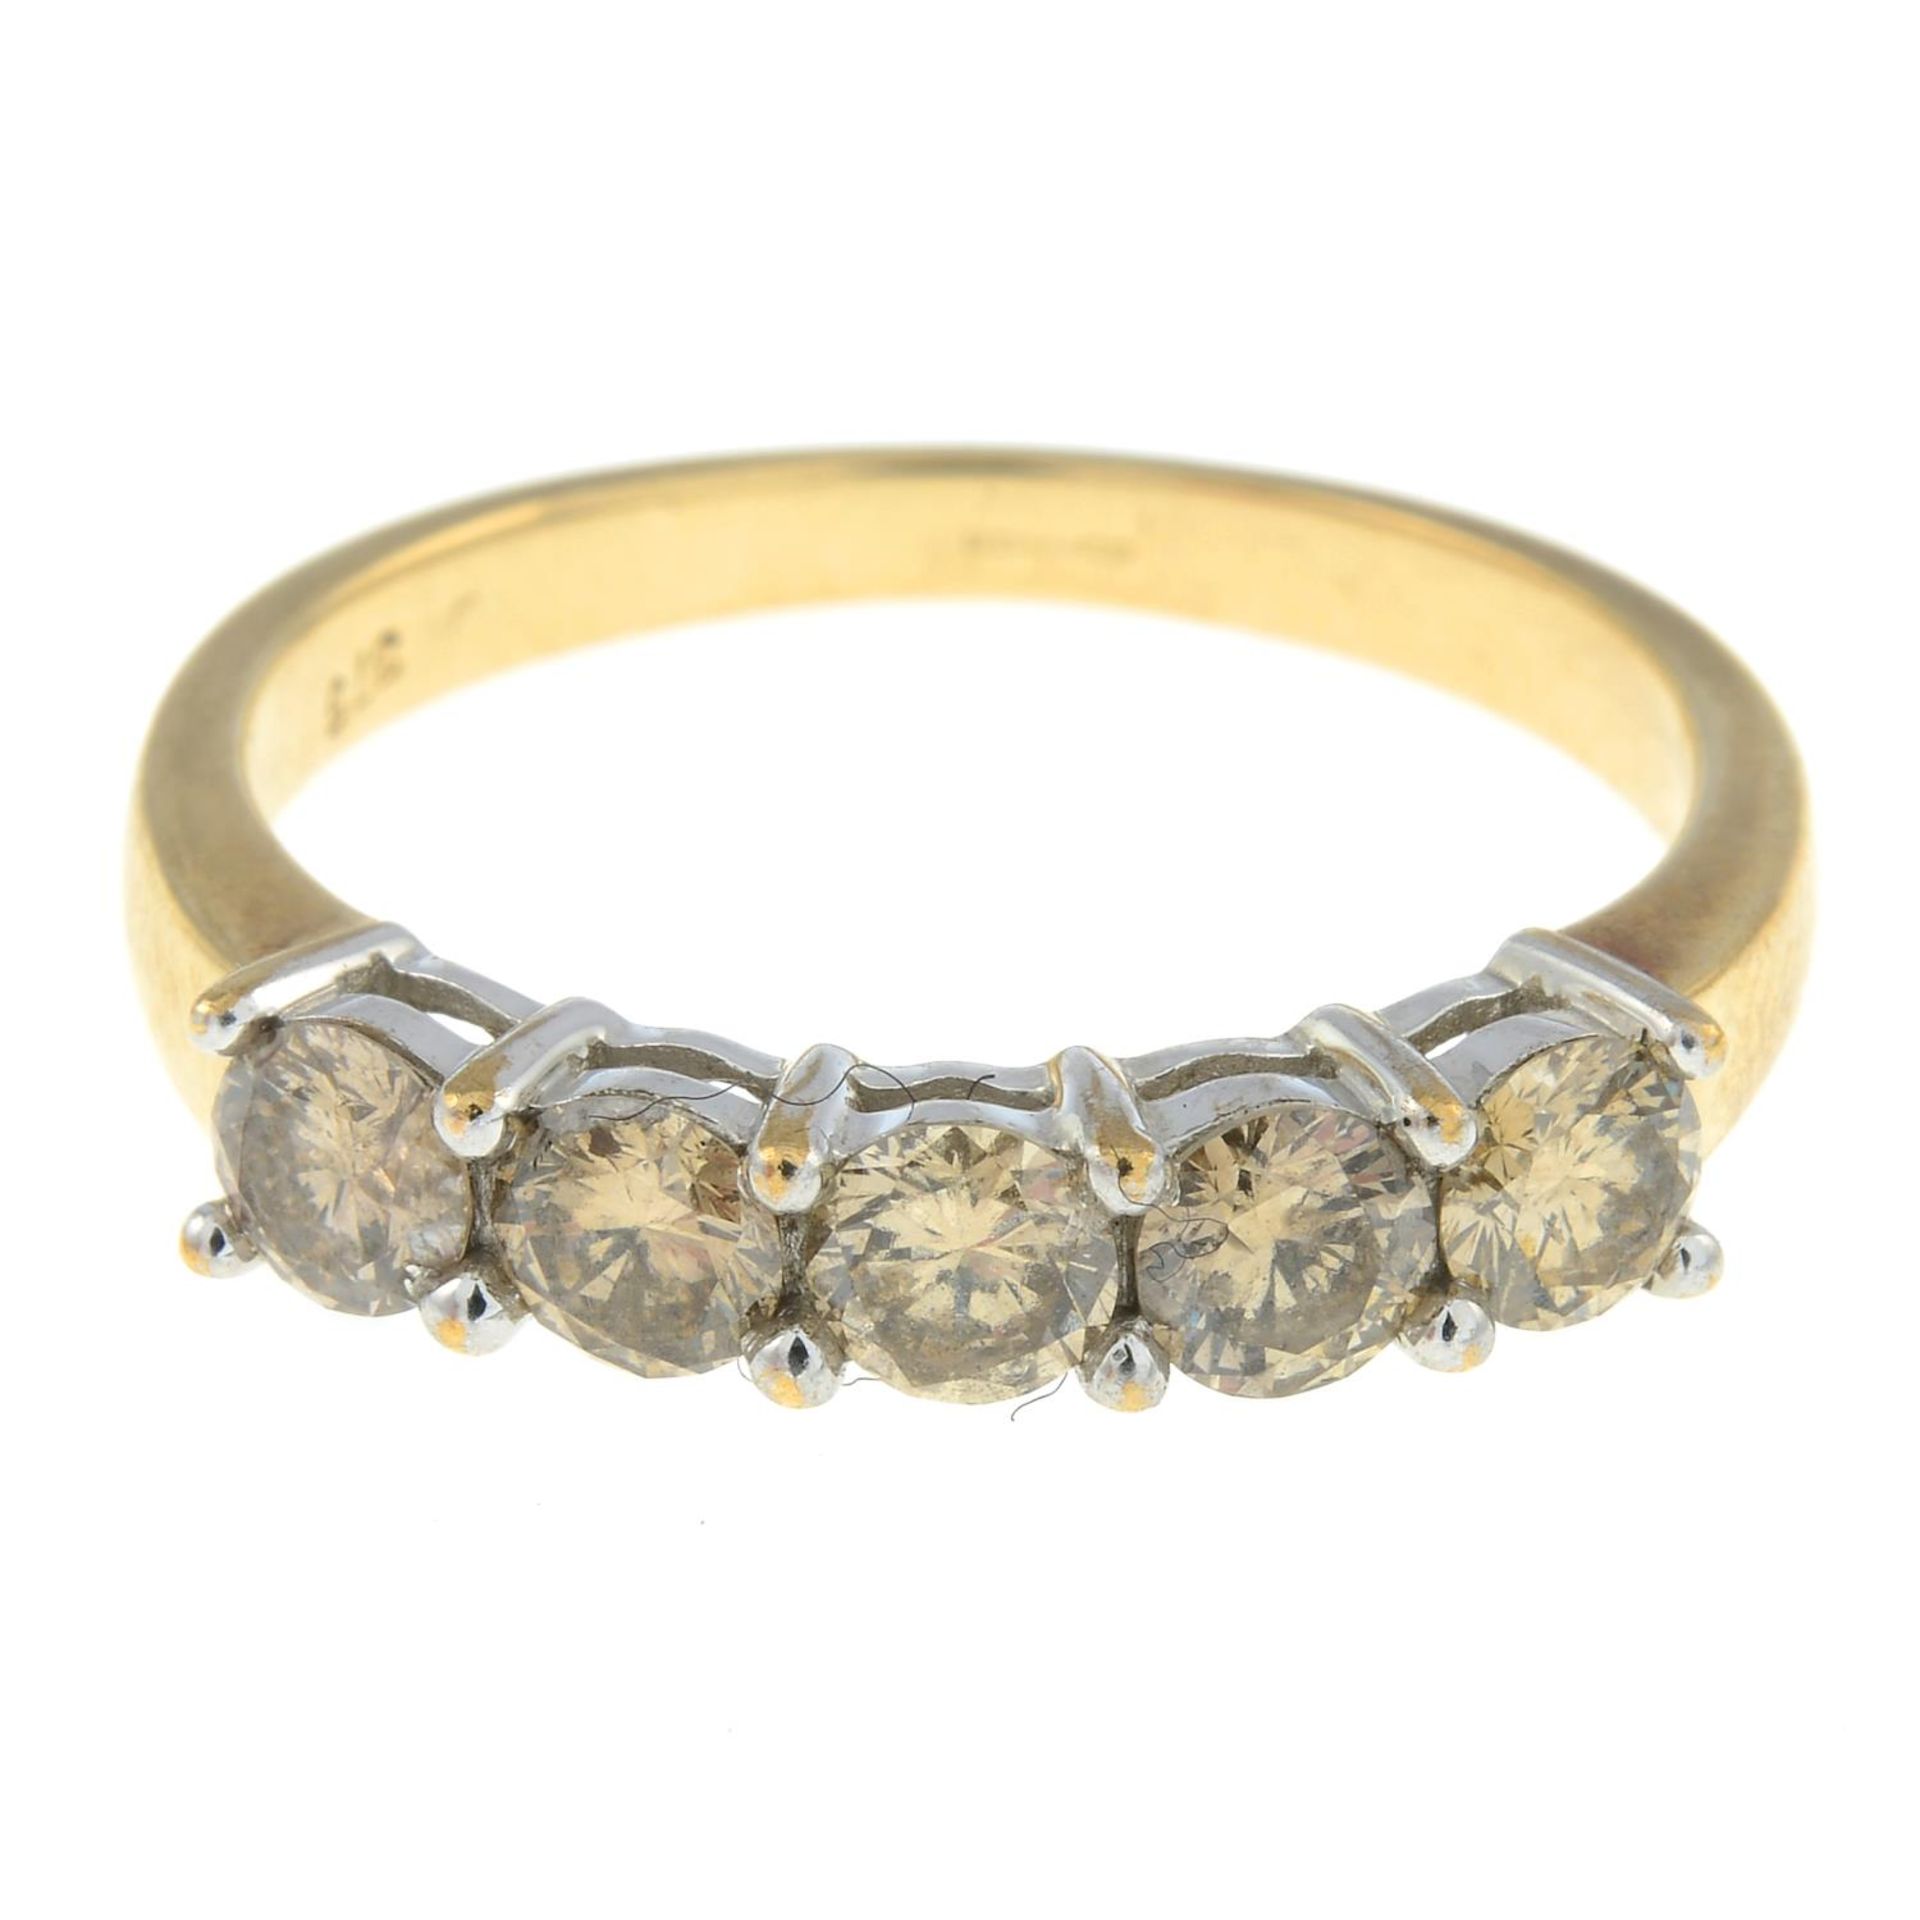 A 9ct gold diamond five-stone ring.Estimated total diamond weight 1ct, tinted colour, P1 clarity.